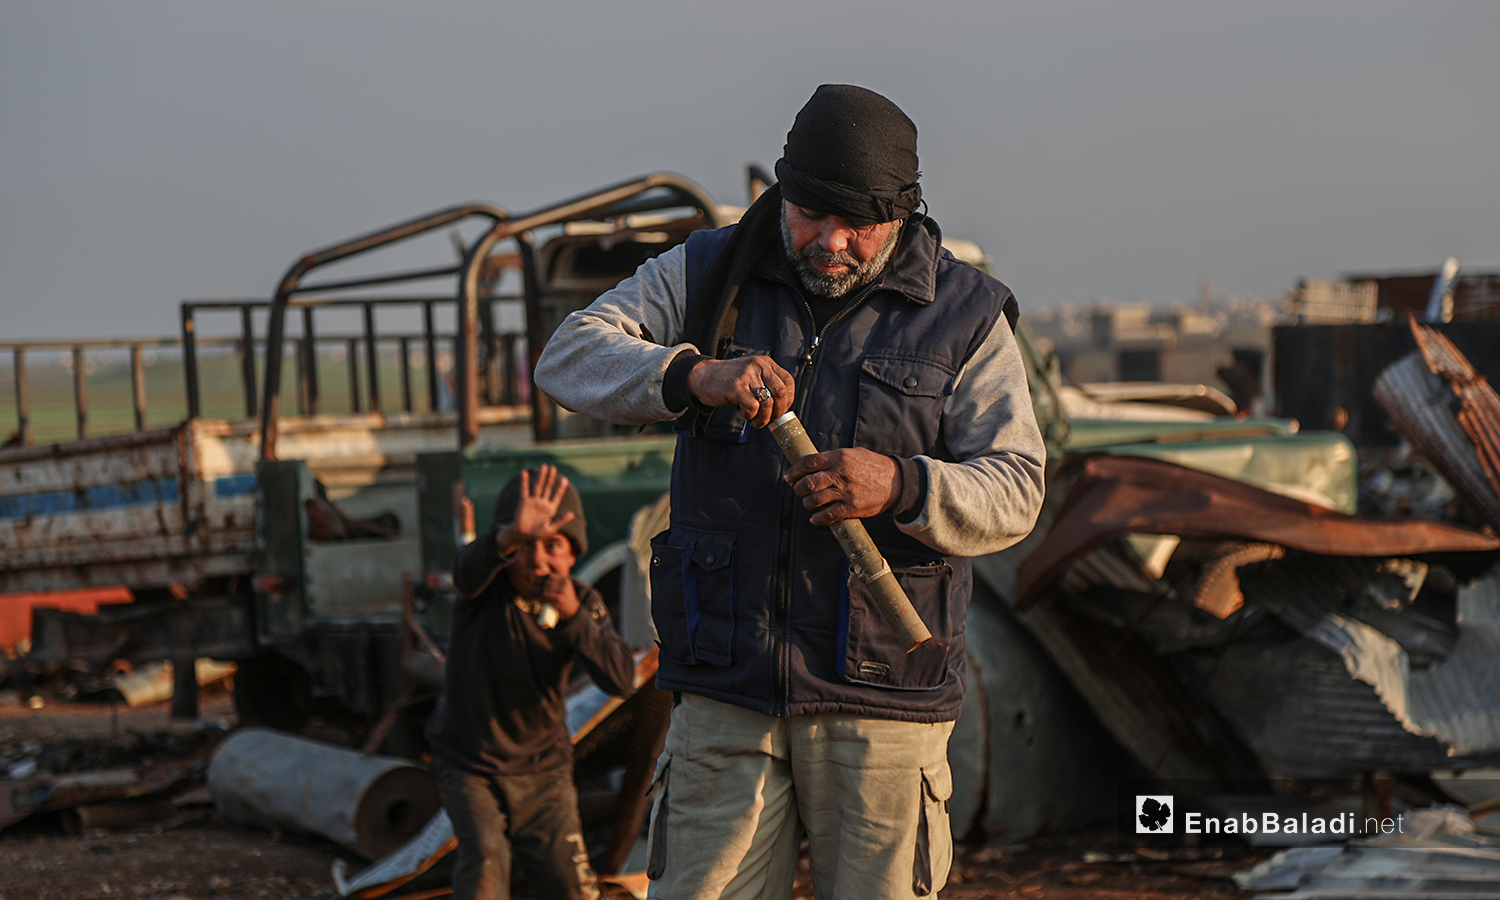 Abu Ahmad, an engineer, has gained sufficient experience to deal with unexploded ordnance (UXO)“safely” during the past ten years, mainly because he was in the military- 5 March 2021 (Enab Baladi-Youssef Gharibi)